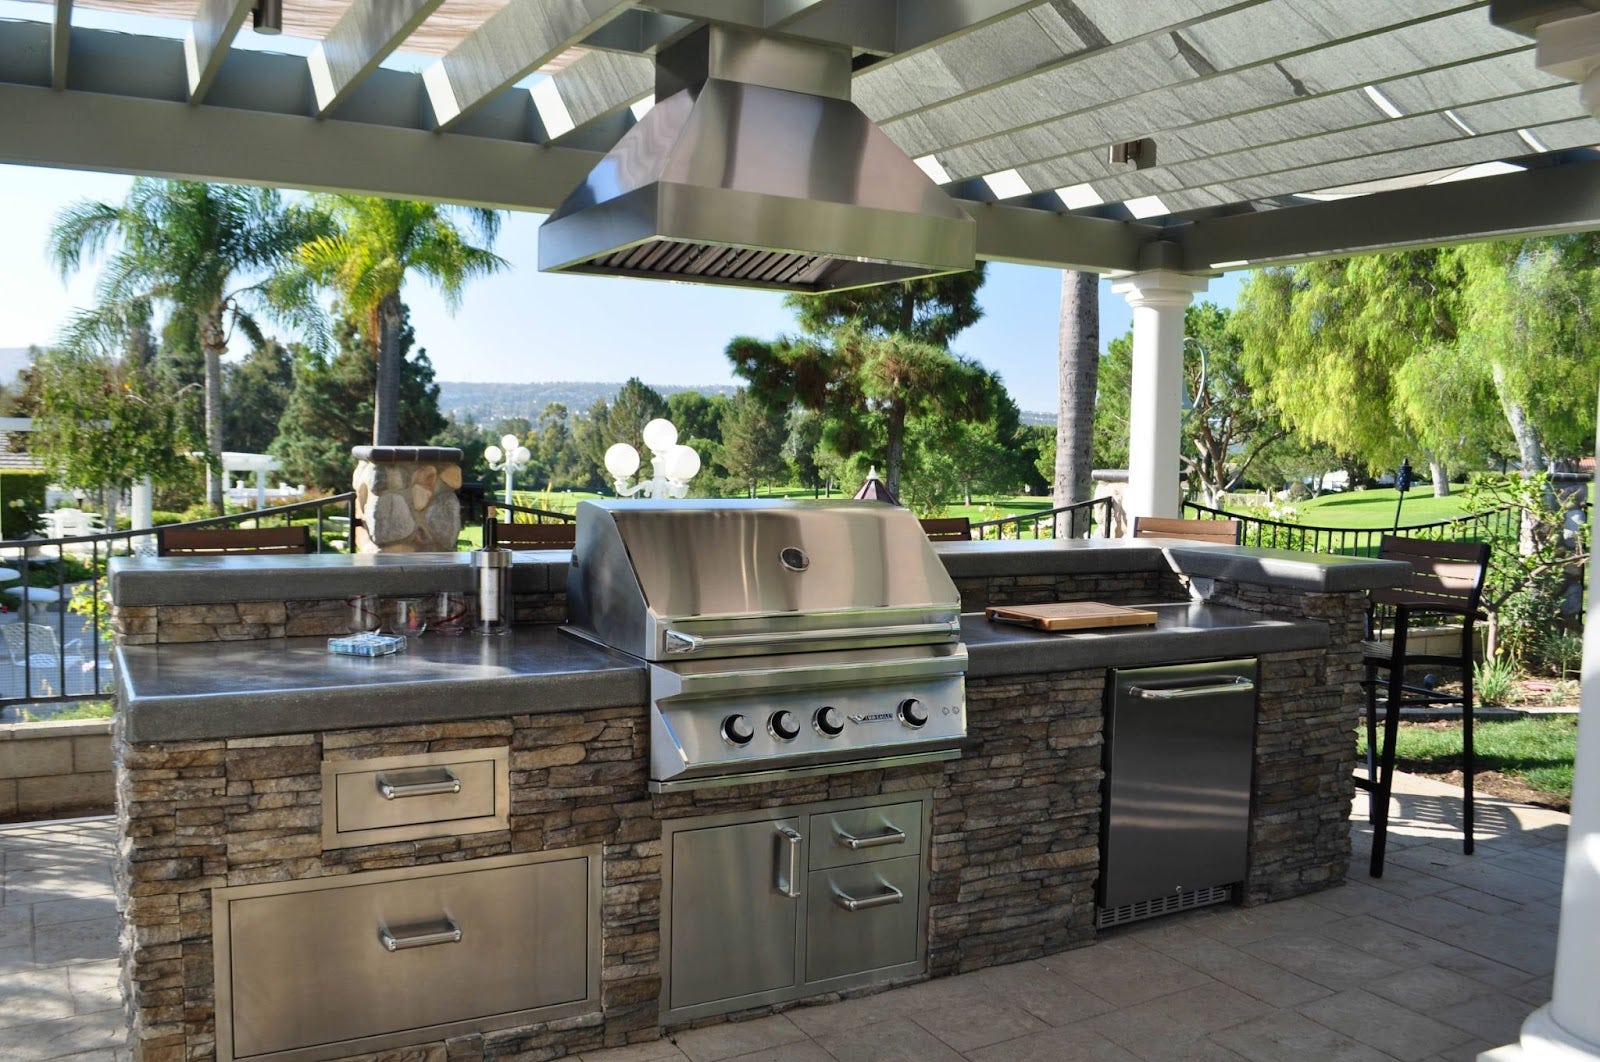 Spacious patio featuring a high-end outdoor kitchen with a built-in grill, stone finishing, and golf course views in the background. - Proline Range Hoods - prolinerangehoods.com 